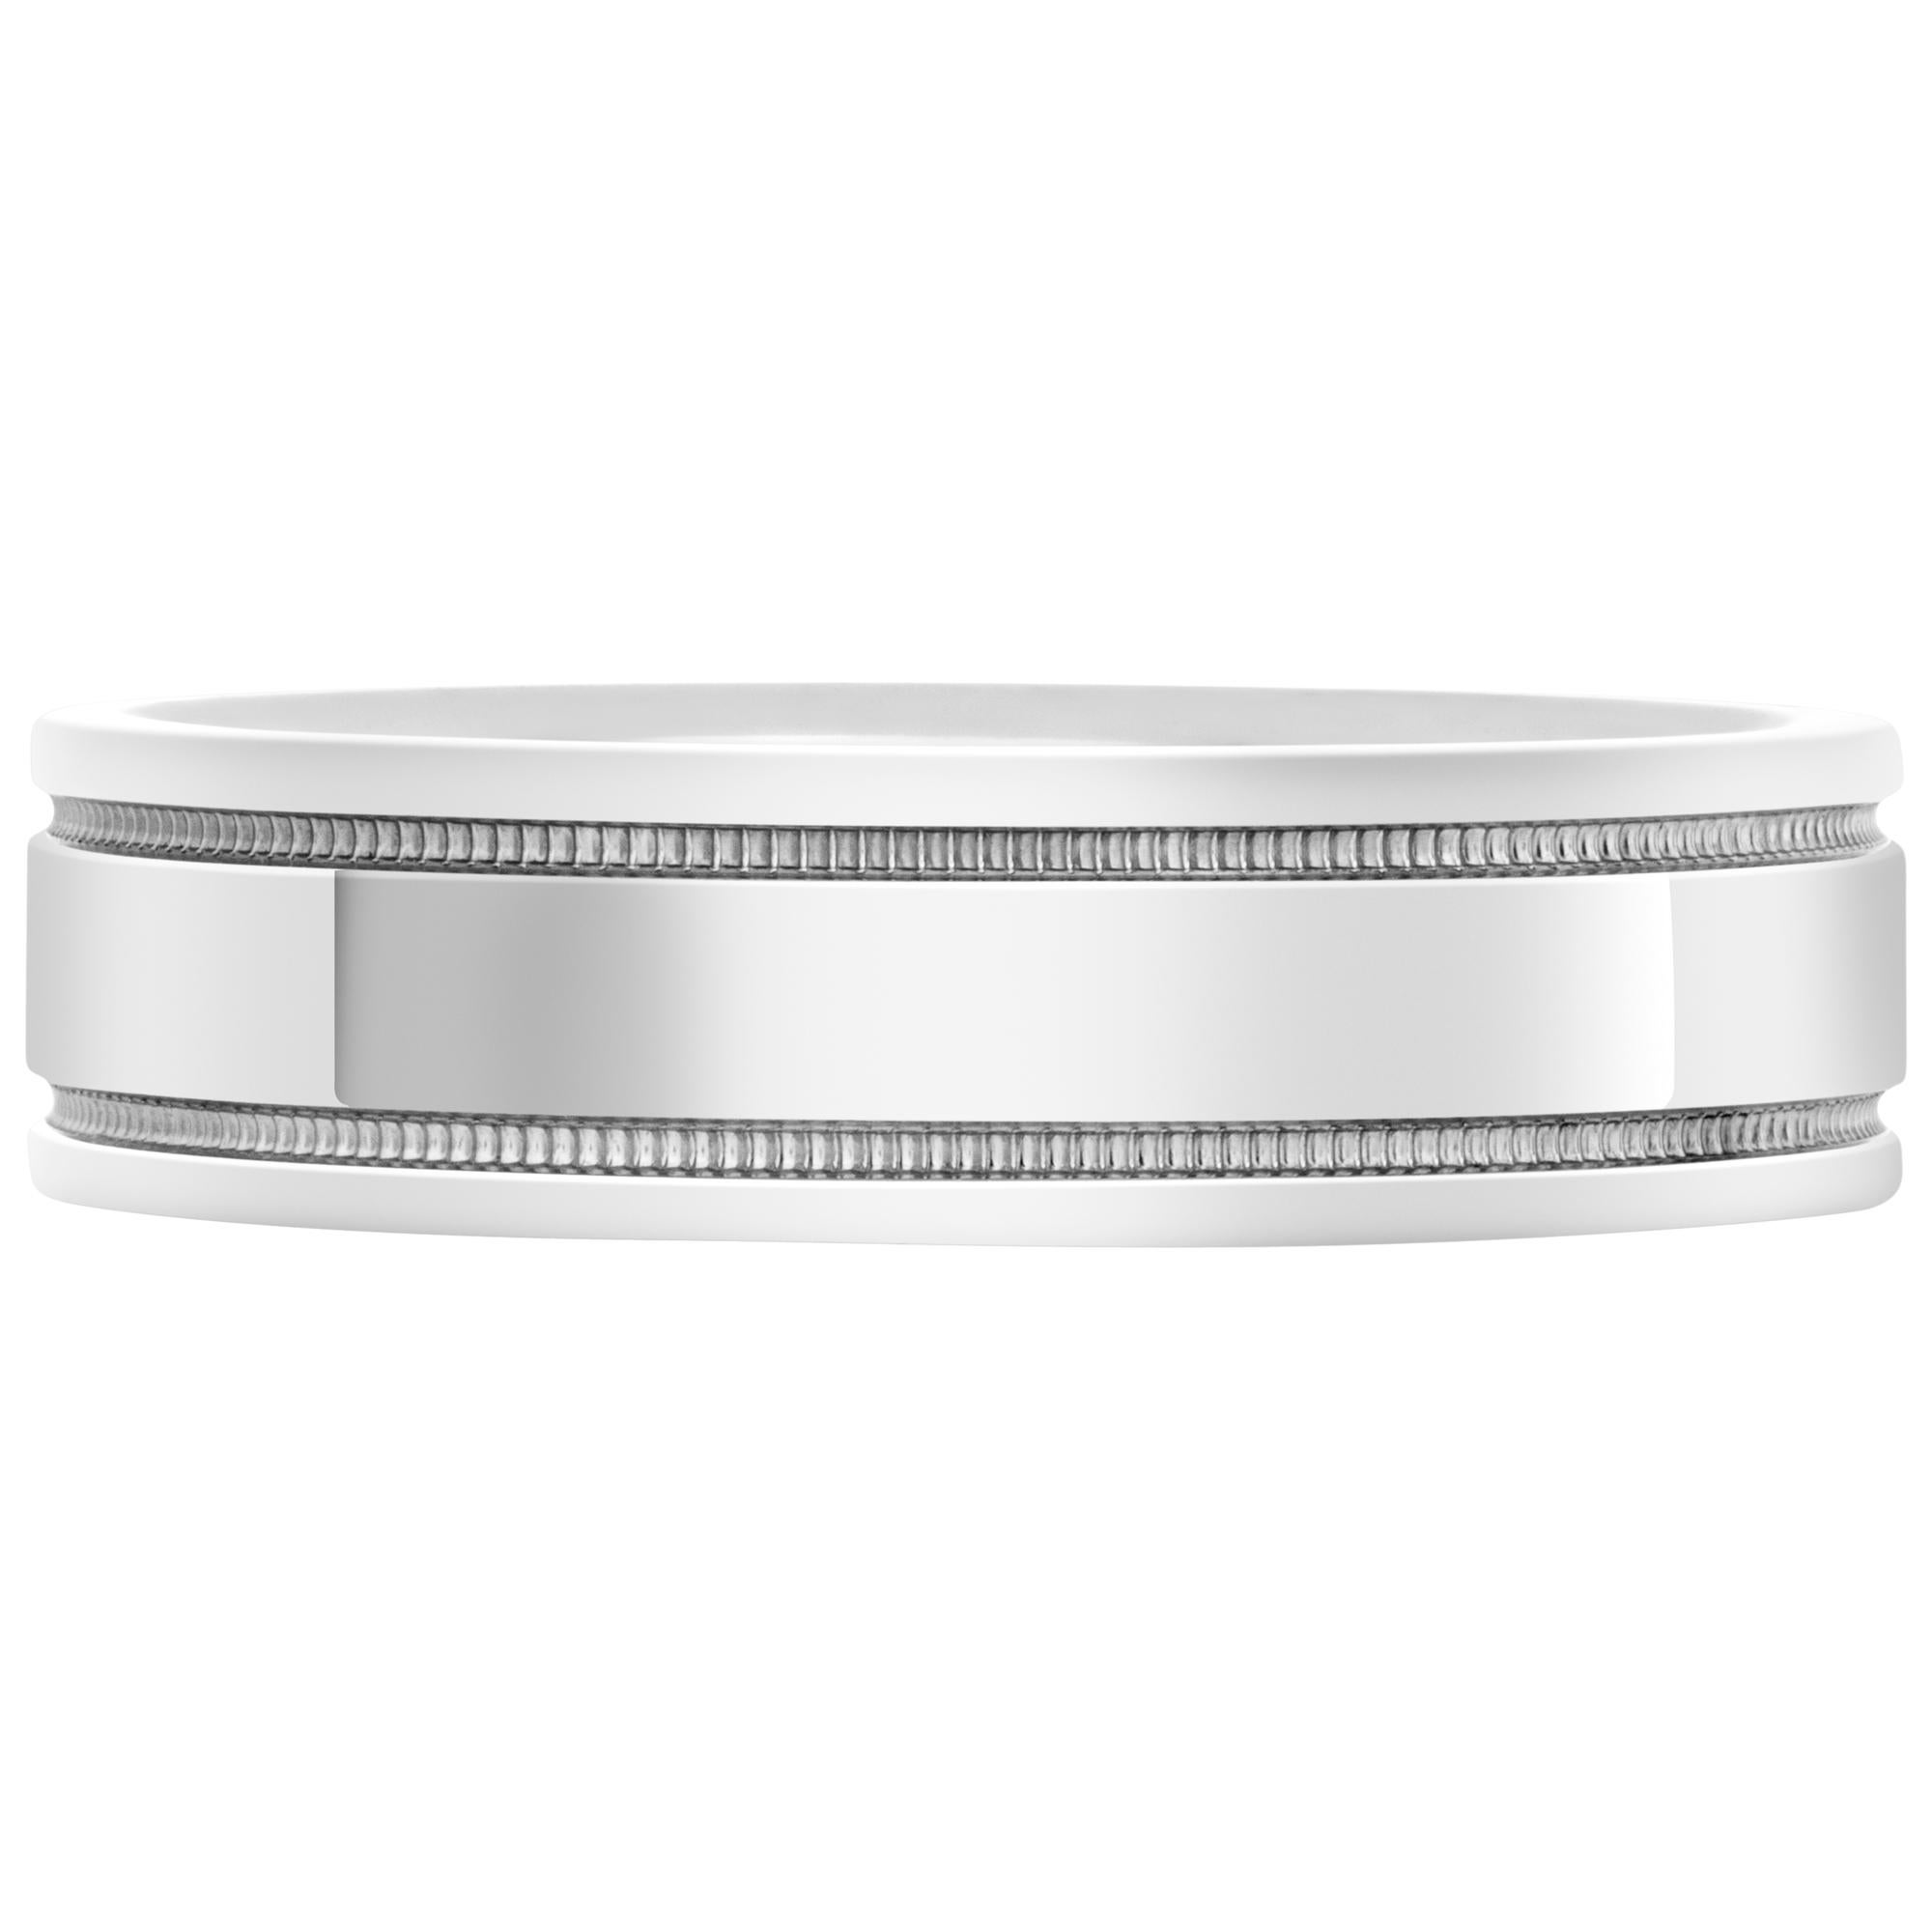 Tiffany & Co. Tiffany Essential Band double milgrain in Platinum.  4 mm wide. Size 10.This Tiffany & Co. ring is currently size 10 and some items can be sized up or down, please ask! It weighs 9.4 gramms and is Platinum.
